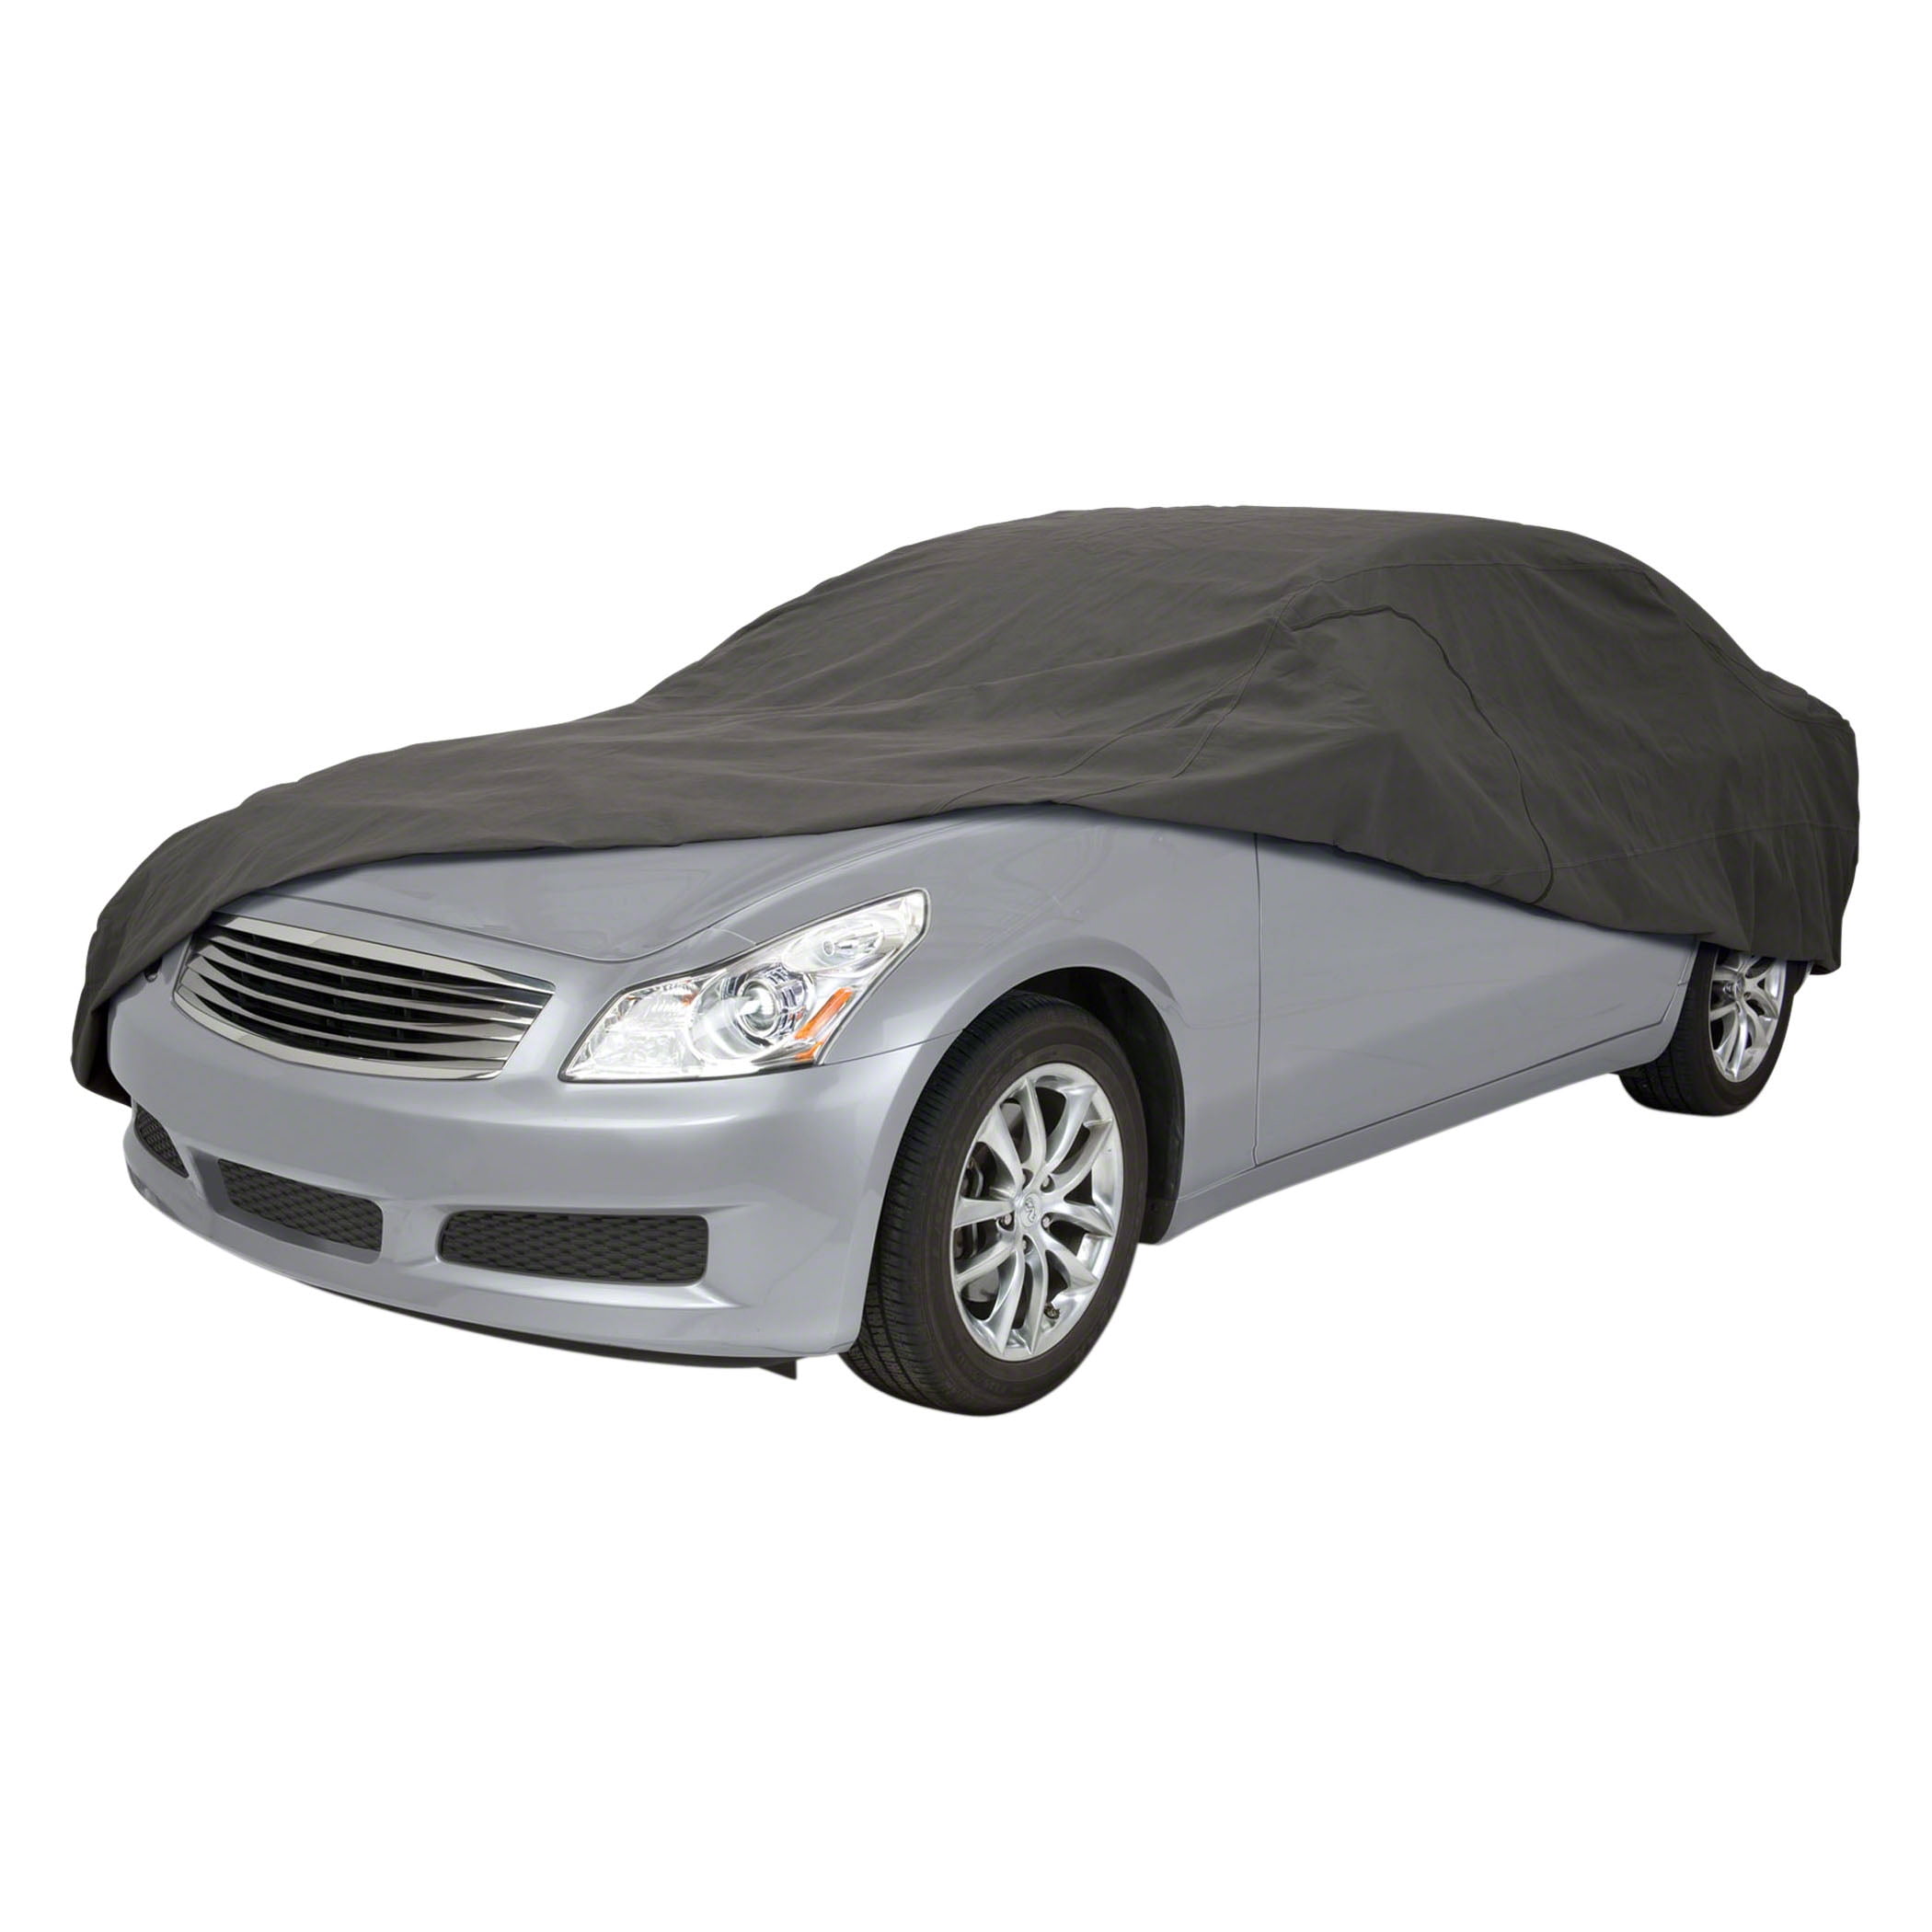 Classic Accessories Over Drive PolyPRO3 Sedan Car Cover 12'6L 10-103-011001-RT 